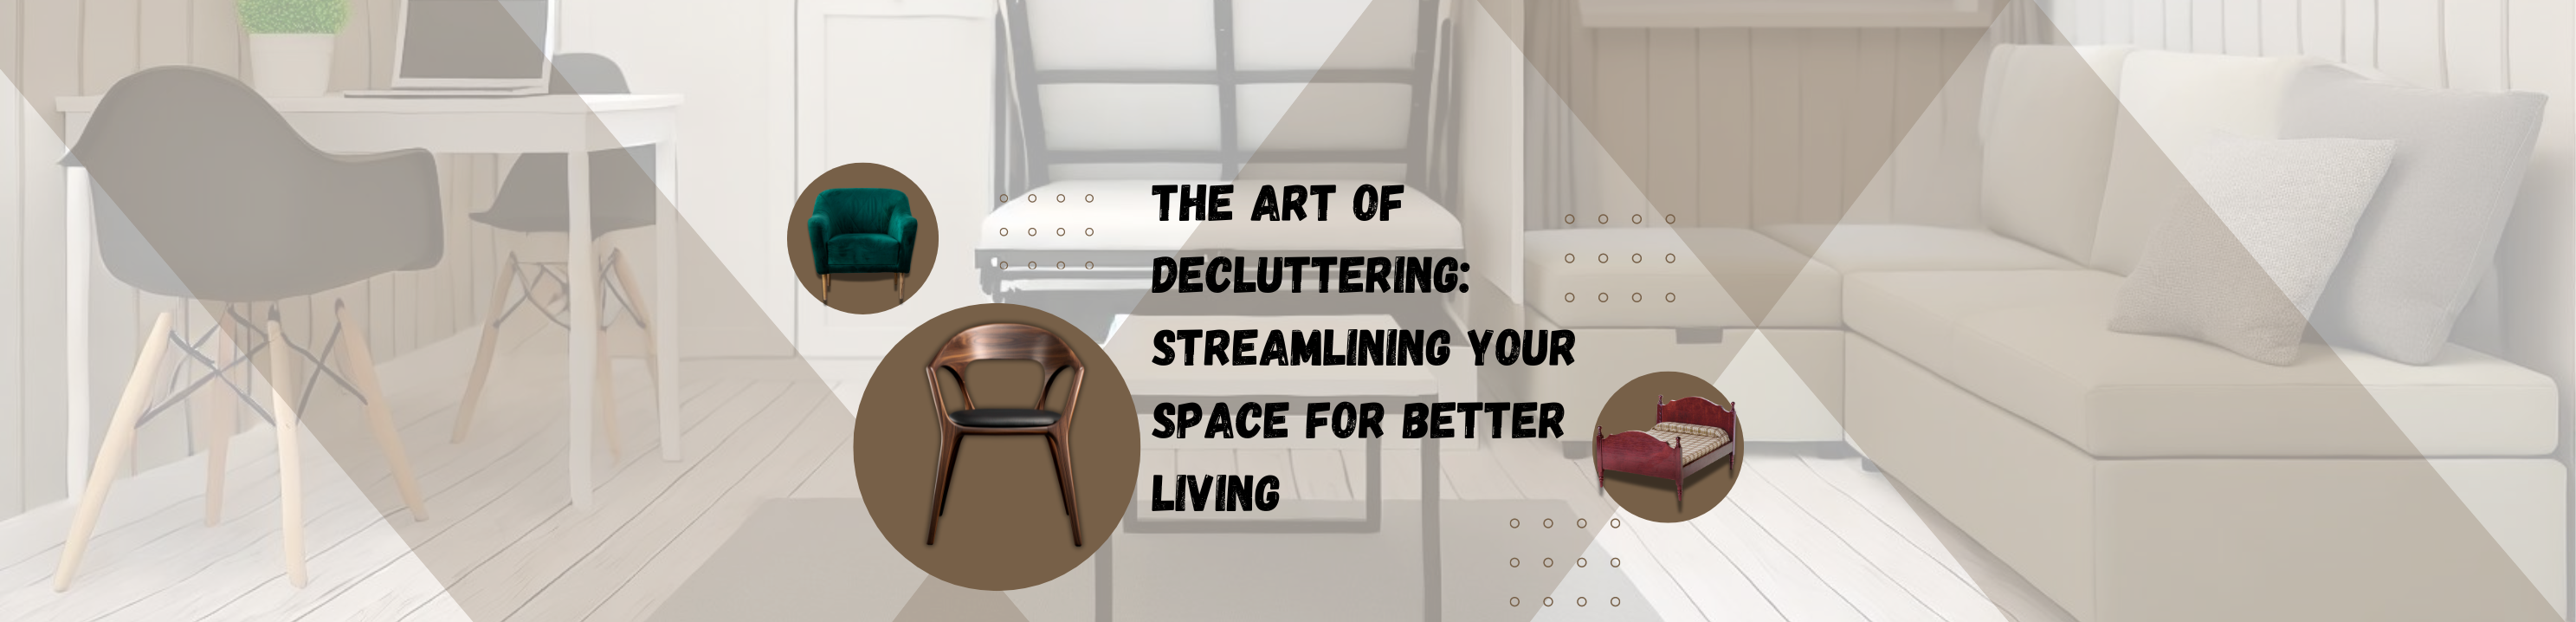 The Art of Decluttering Streamlining Your Space for Better Living